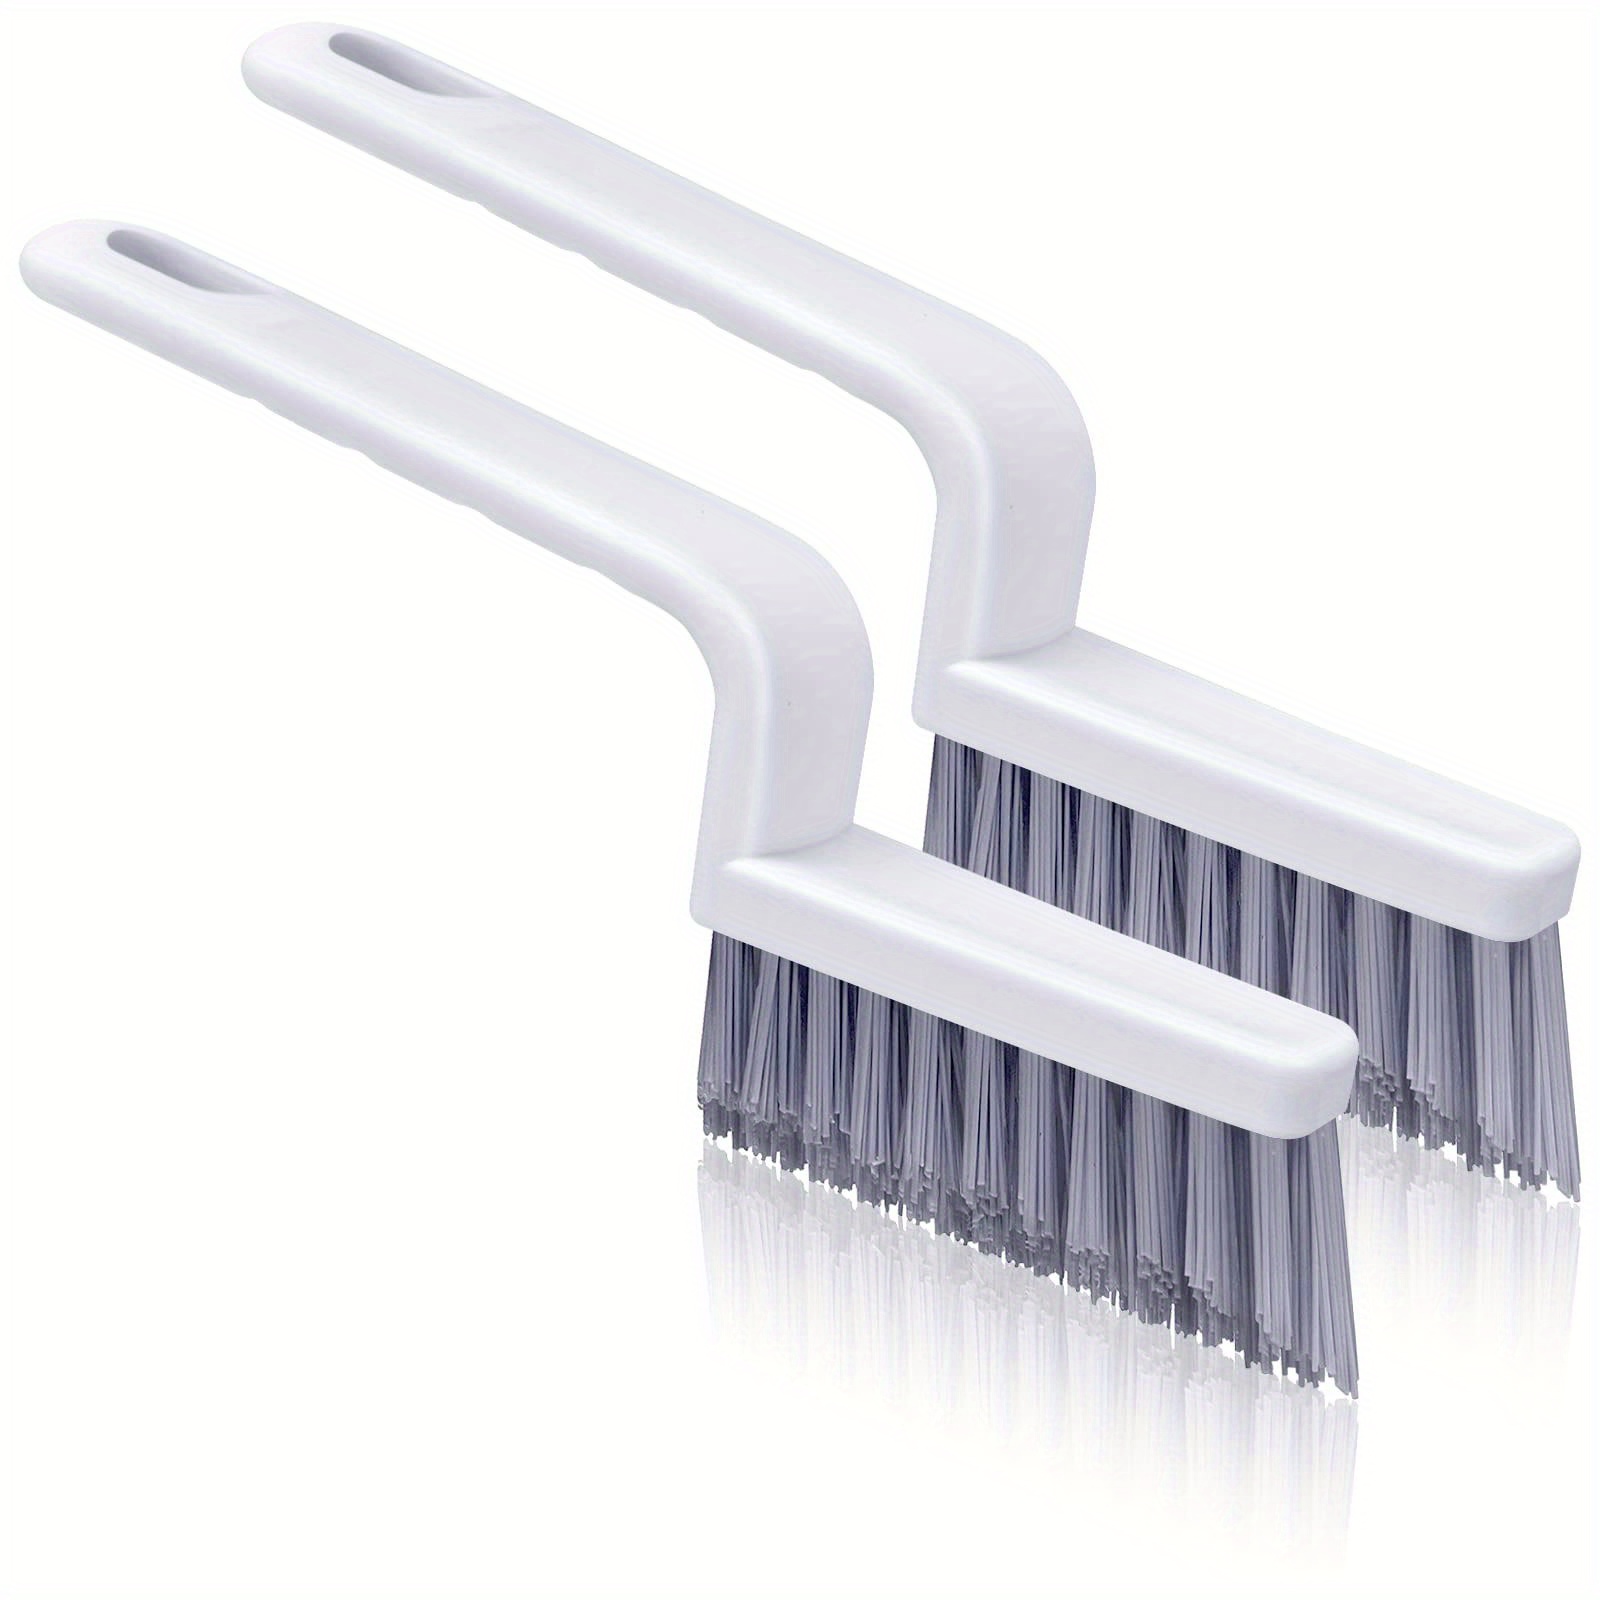 2pcs Crevice Cleaning Brush Multifunctional Grout Cleaner